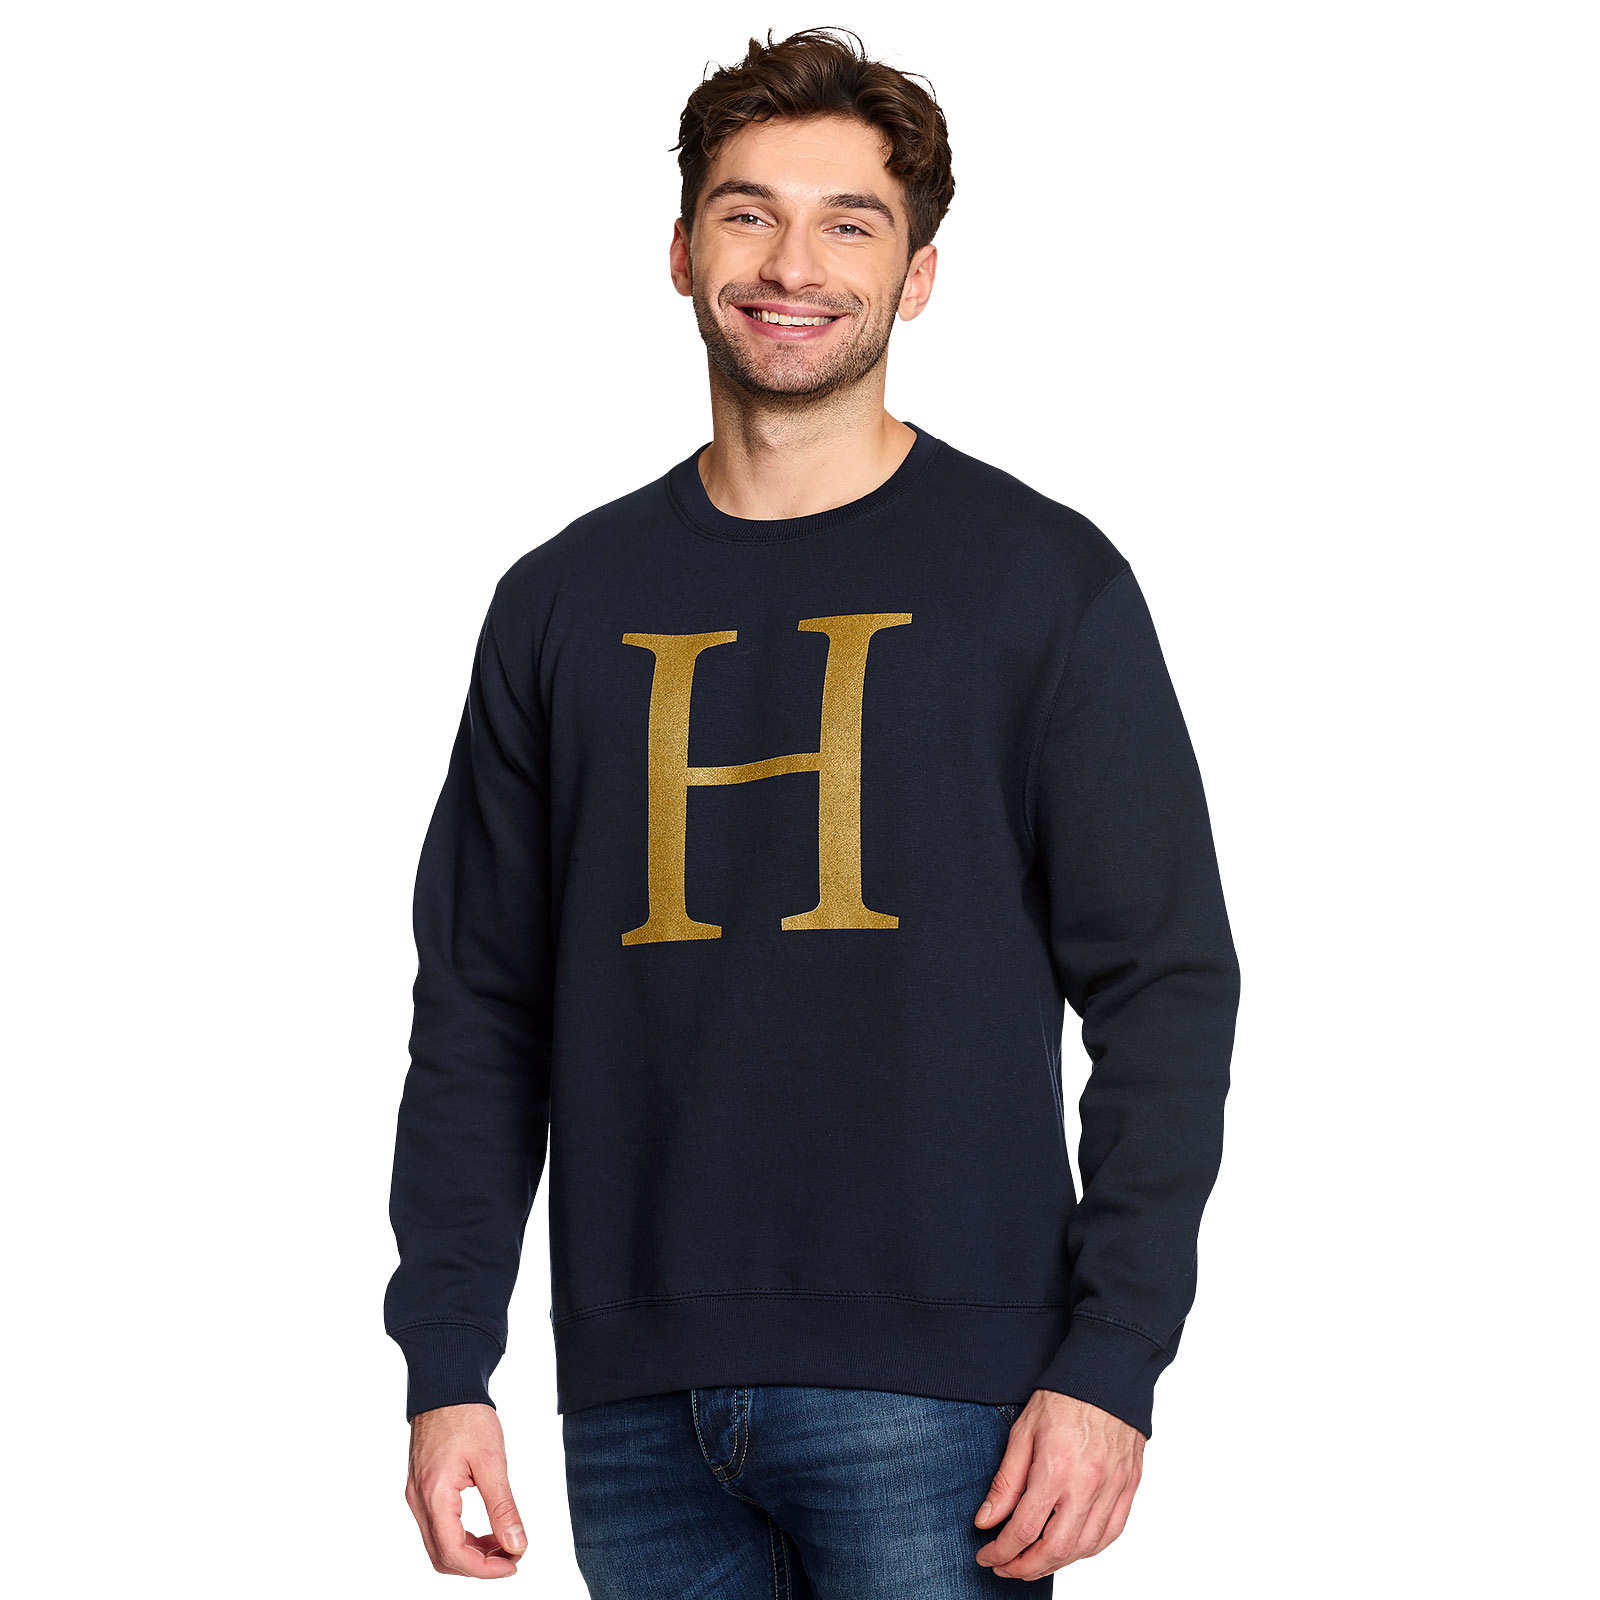 Harry Potter - H for Harry Sweater blau